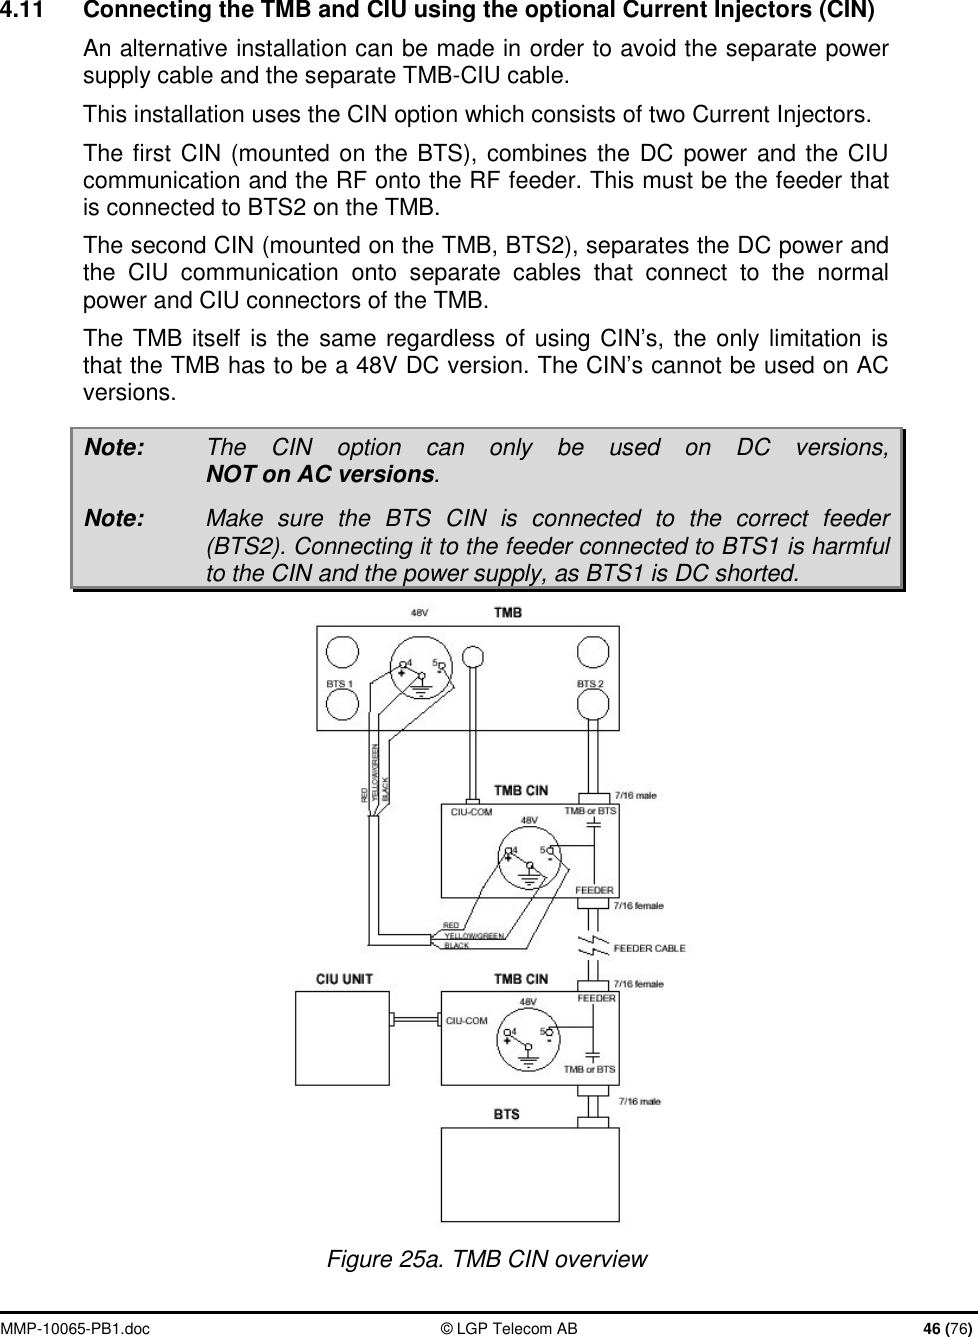  MMP-10065-PB1.doc  © LGP Telecom AB  46 (76)   4.11  Connecting the TMB and CIU using the optional Current Injectors (CIN) An alternative installation can be made in order to avoid the separate power supply cable and the separate TMB-CIU cable. This installation uses the CIN option which consists of two Current Injectors. The first CIN (mounted on the BTS), combines the DC power and the CIU communication and the RF onto the RF feeder. This must be the feeder that is connected to BTS2 on the TMB. The second CIN (mounted on the TMB, BTS2), separates the DC power and the CIU communication onto separate cables that connect to the normal power and CIU connectors of the TMB. The TMB itself is the same regardless of using CIN’s, the only limitation is that the TMB has to be a 48V DC version. The CIN’s cannot be used on AC versions. Note:  The CIN option can only be used on DC versions, NOT on AC versions. Note:  Make sure the BTS CIN is connected to the correct feeder (BTS2). Connecting it to the feeder connected to BTS1 is harmful to the CIN and the power supply, as BTS1 is DC shorted.  Figure 25a. TMB CIN overview